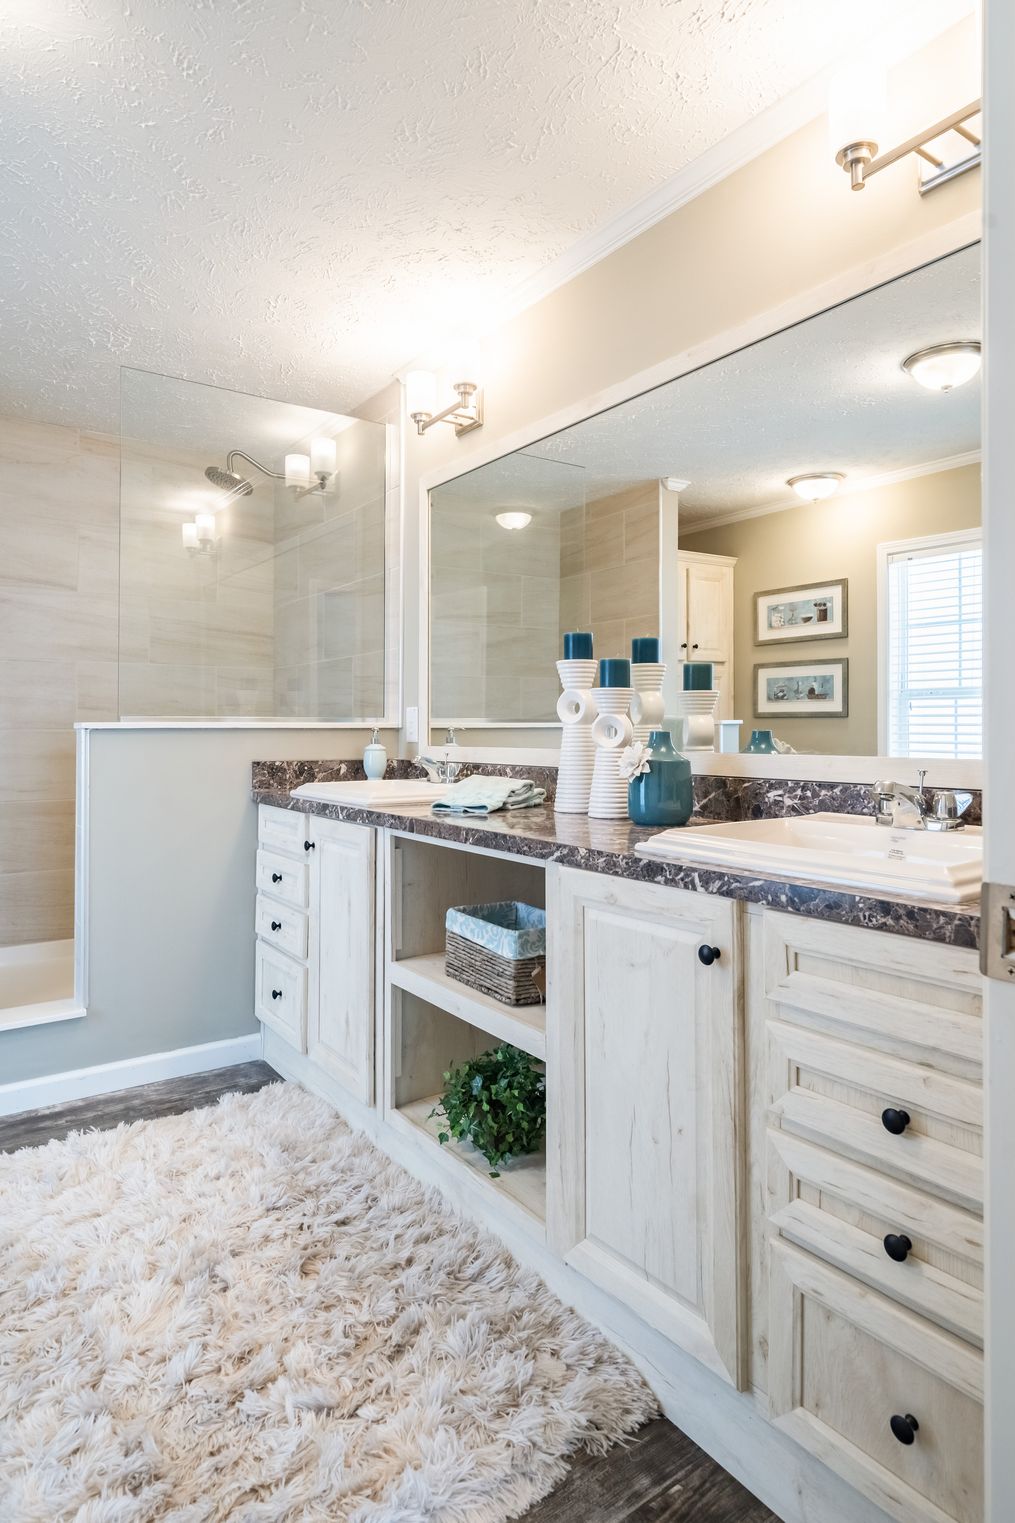 The 4608 ROCKETEER 5628 Master Bathroom. This Manufactured Mobile Home features 3 bedrooms and 2 baths.